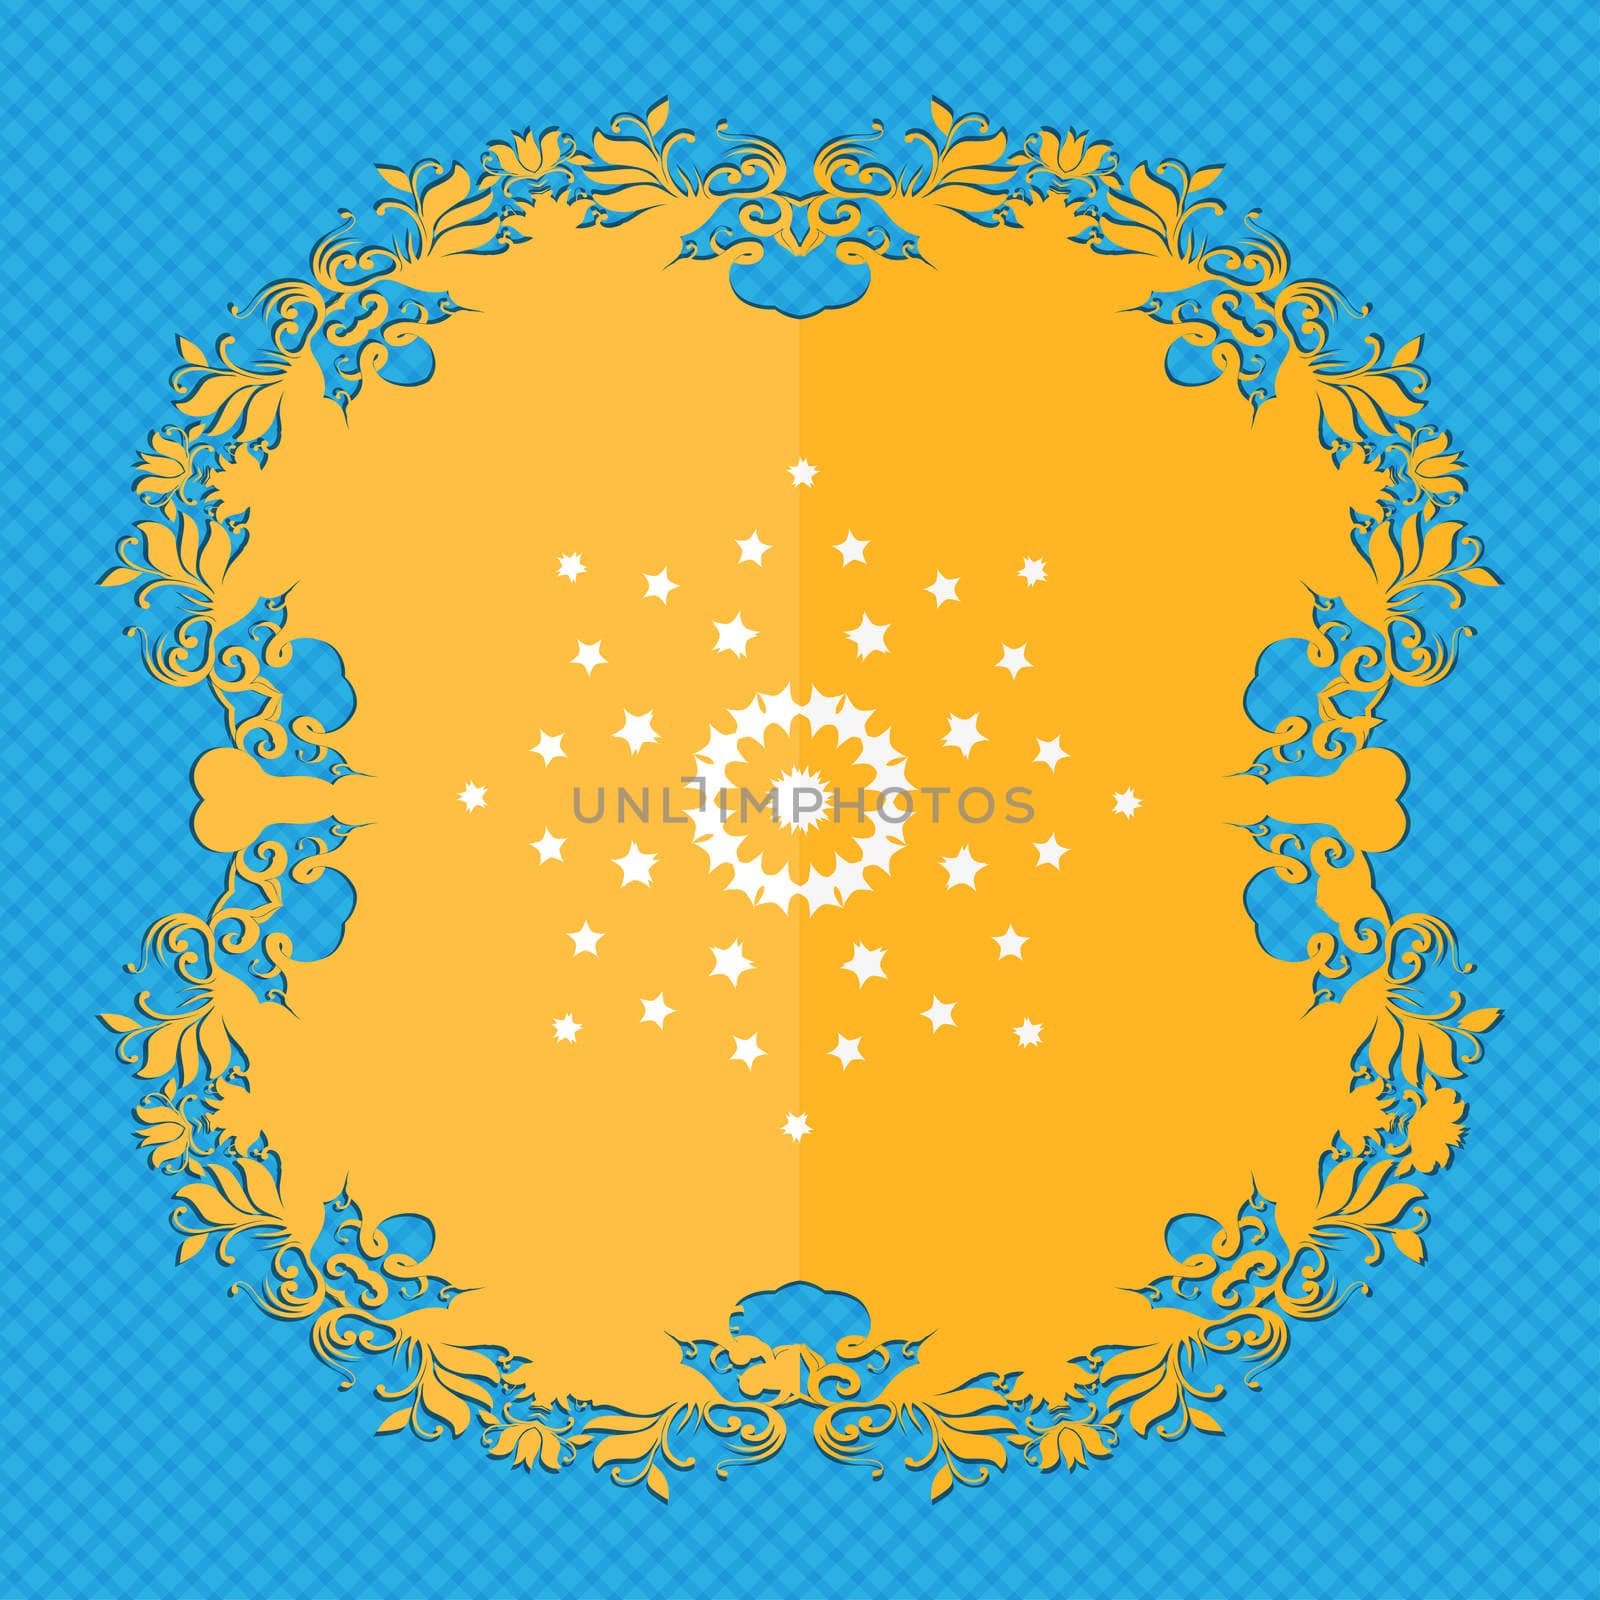 Star sign icon. Favorite button. Navigation symbol. Floral flat design on a blue abstract background with place for your text. illustration